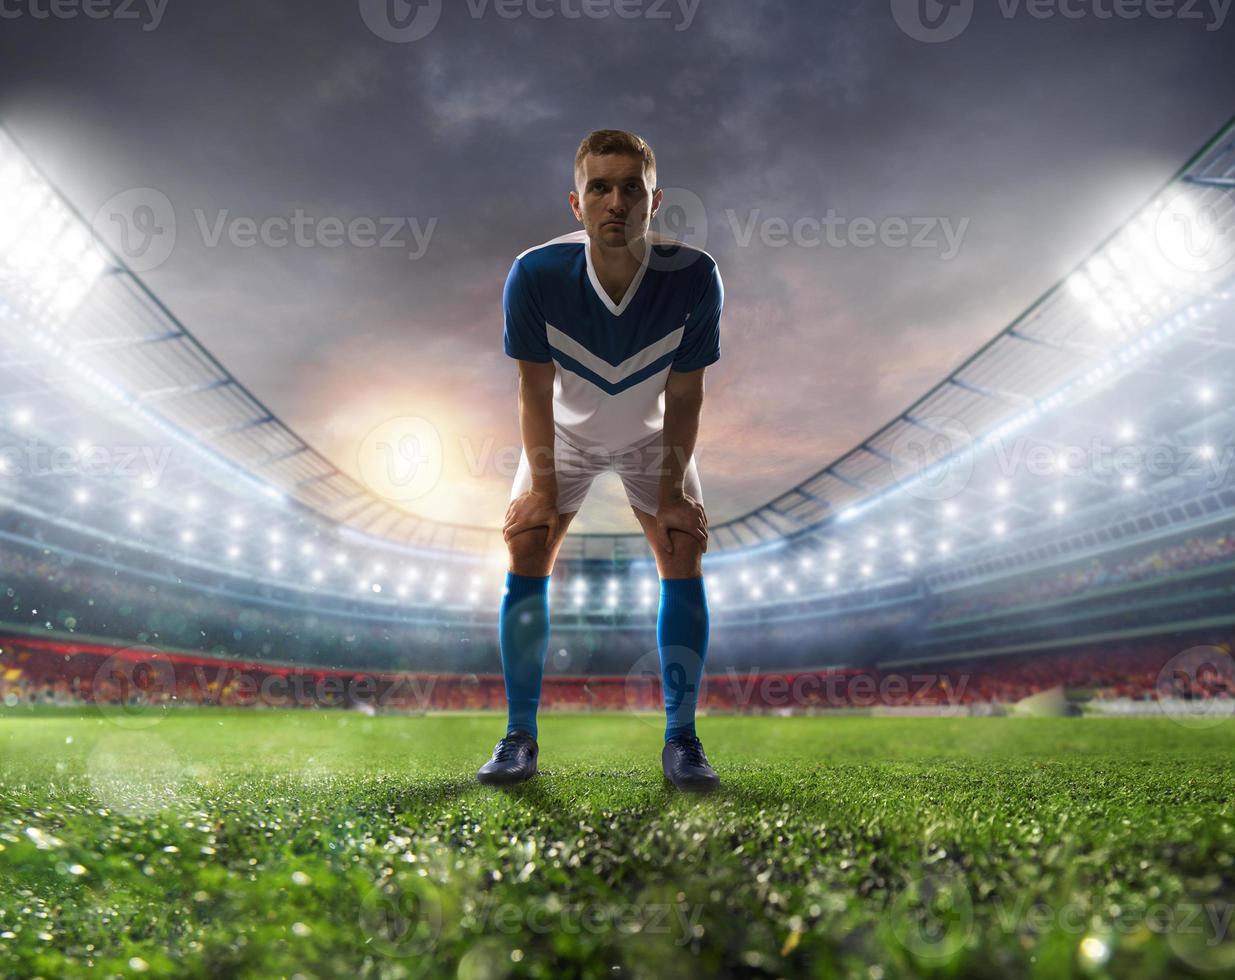 Soccer player ready to kick the soccerball at the stadium during the match photo